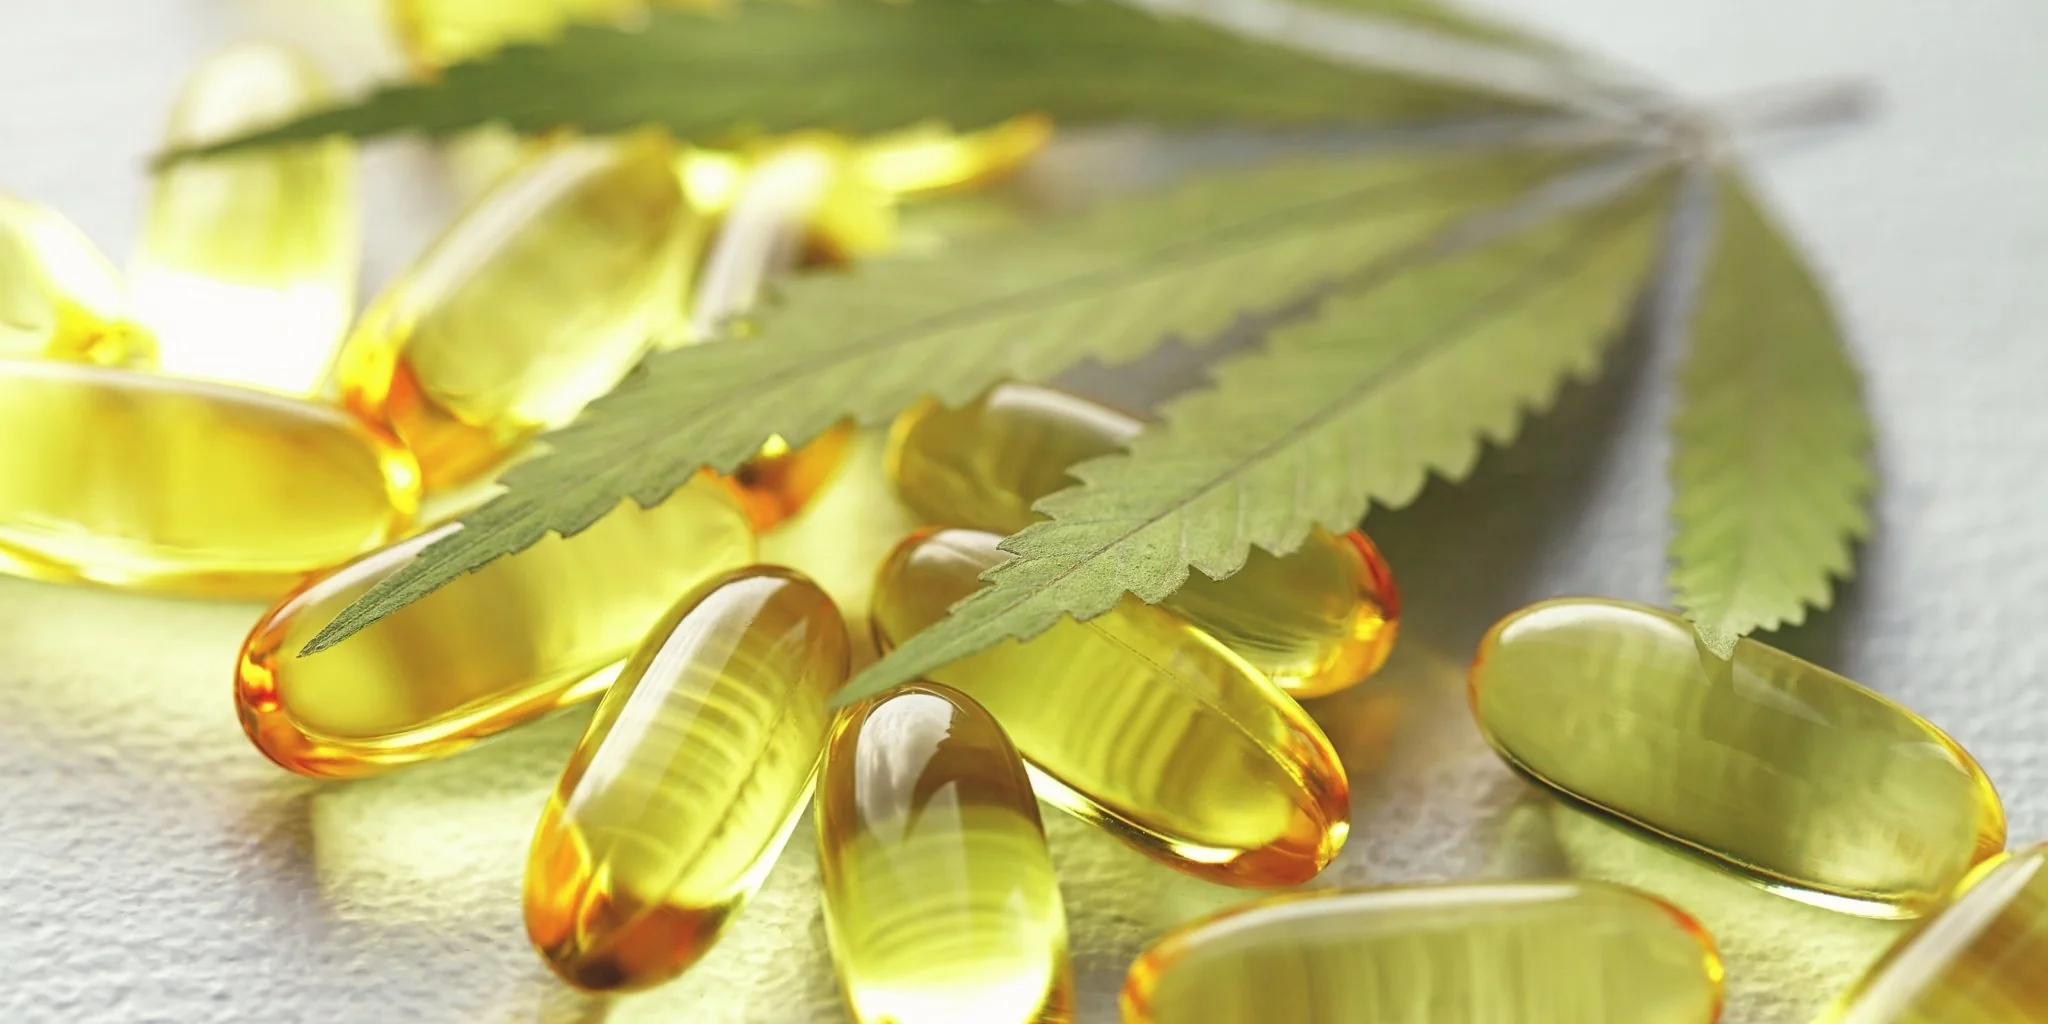 Best CBD Capsules for Pain Relief in the UK